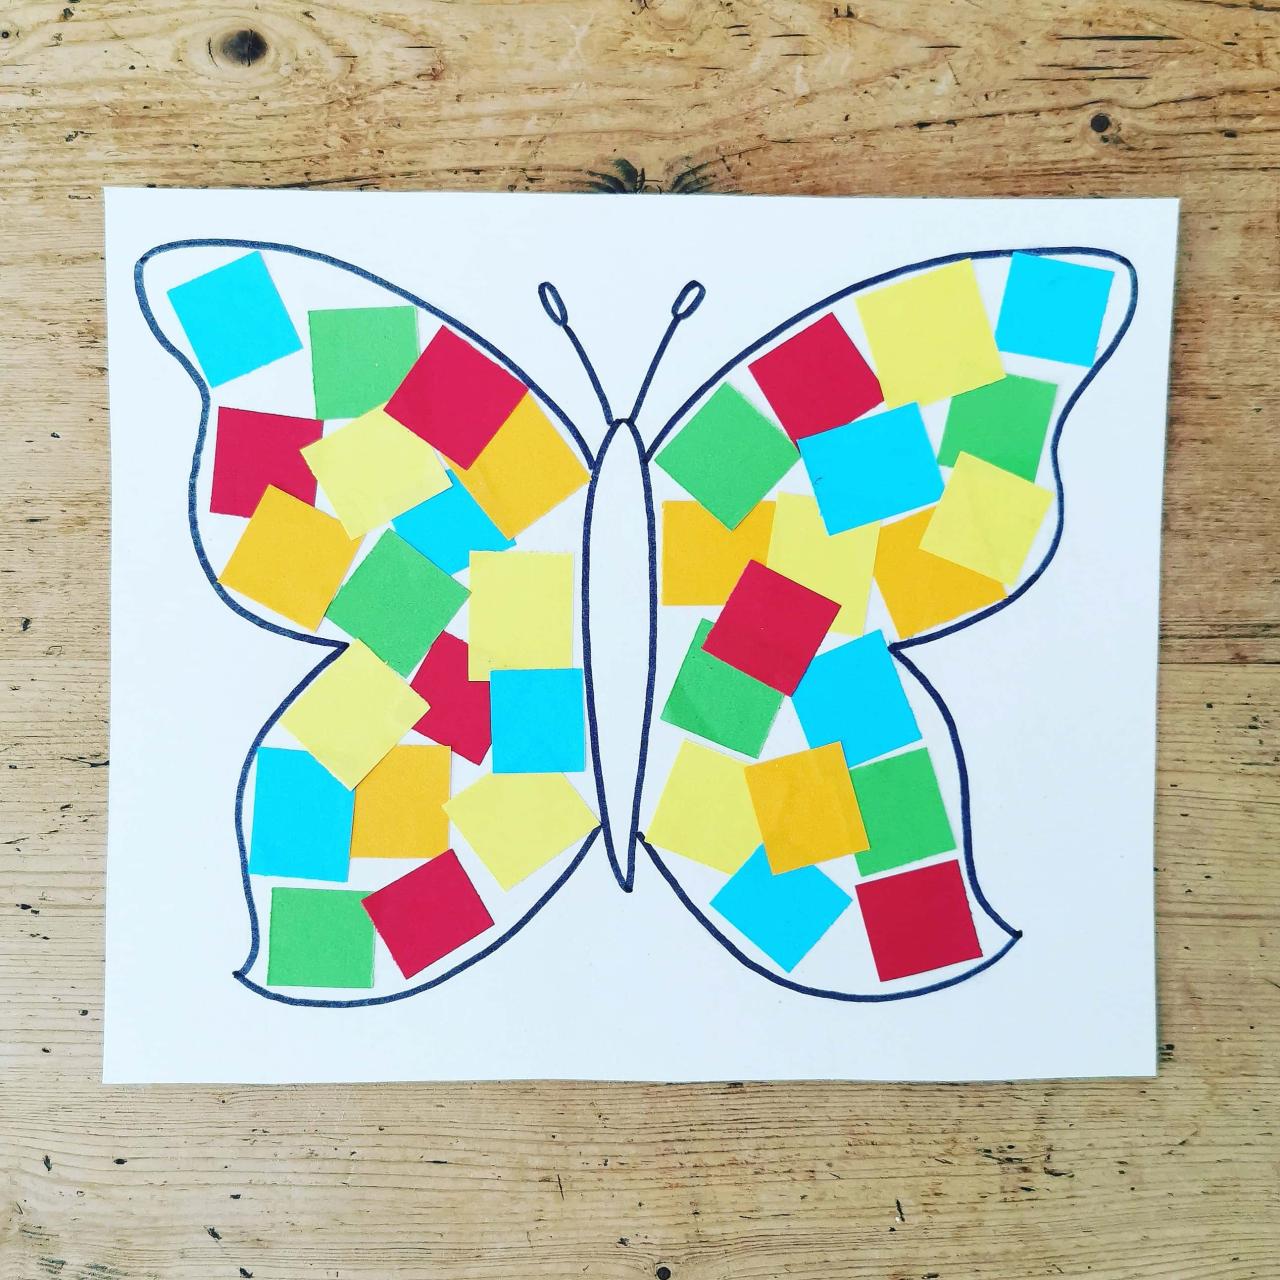 Simple Paper Mosaic Activities For Kids - Doing The Mum Thing